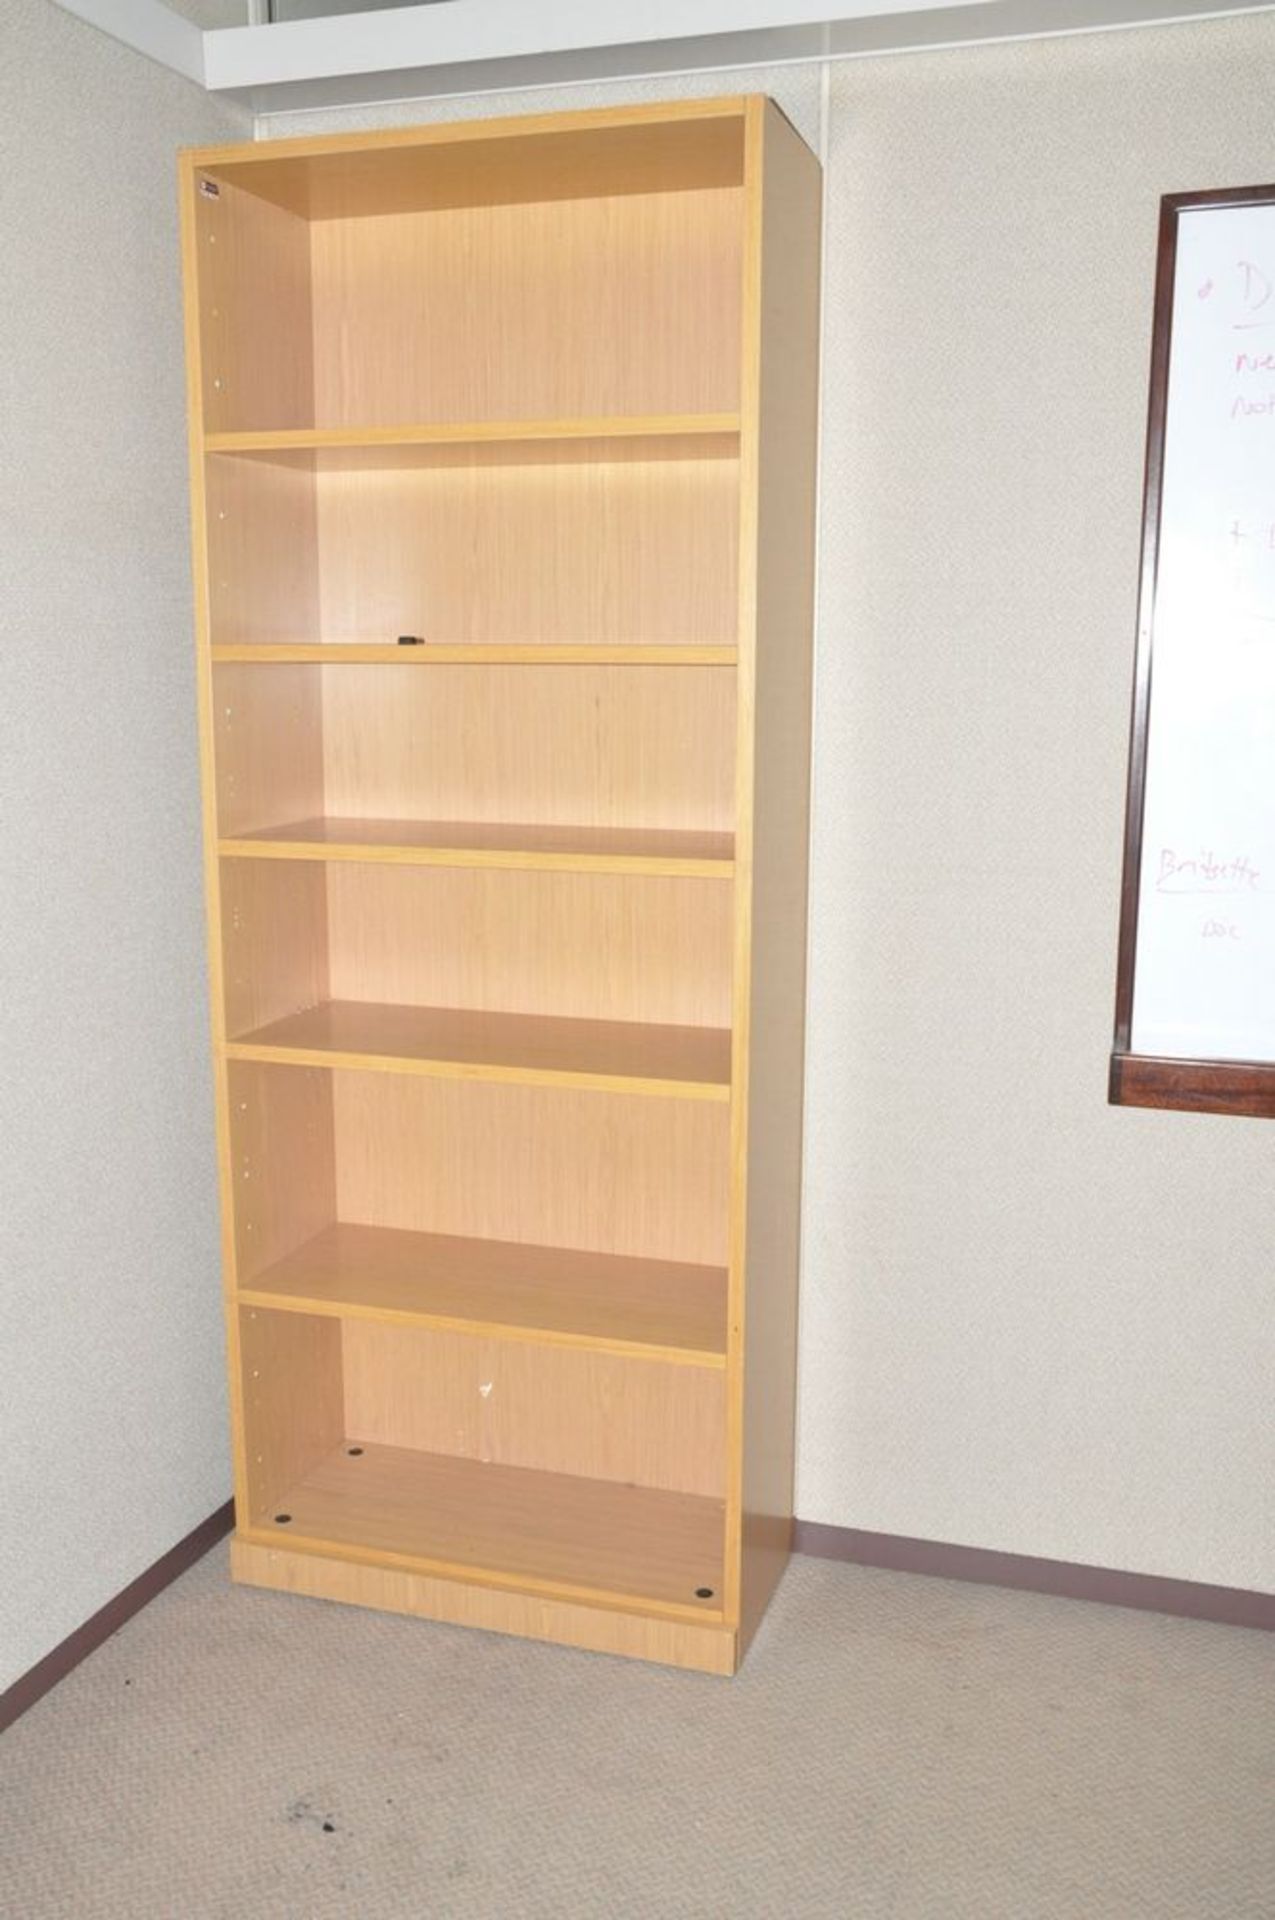 Lot-(1) Desk, (2) Lateral File Cabinets, (1) Bookcase, (2) Chairs and (1) Dry Erase Board in (1) - Image 4 of 5